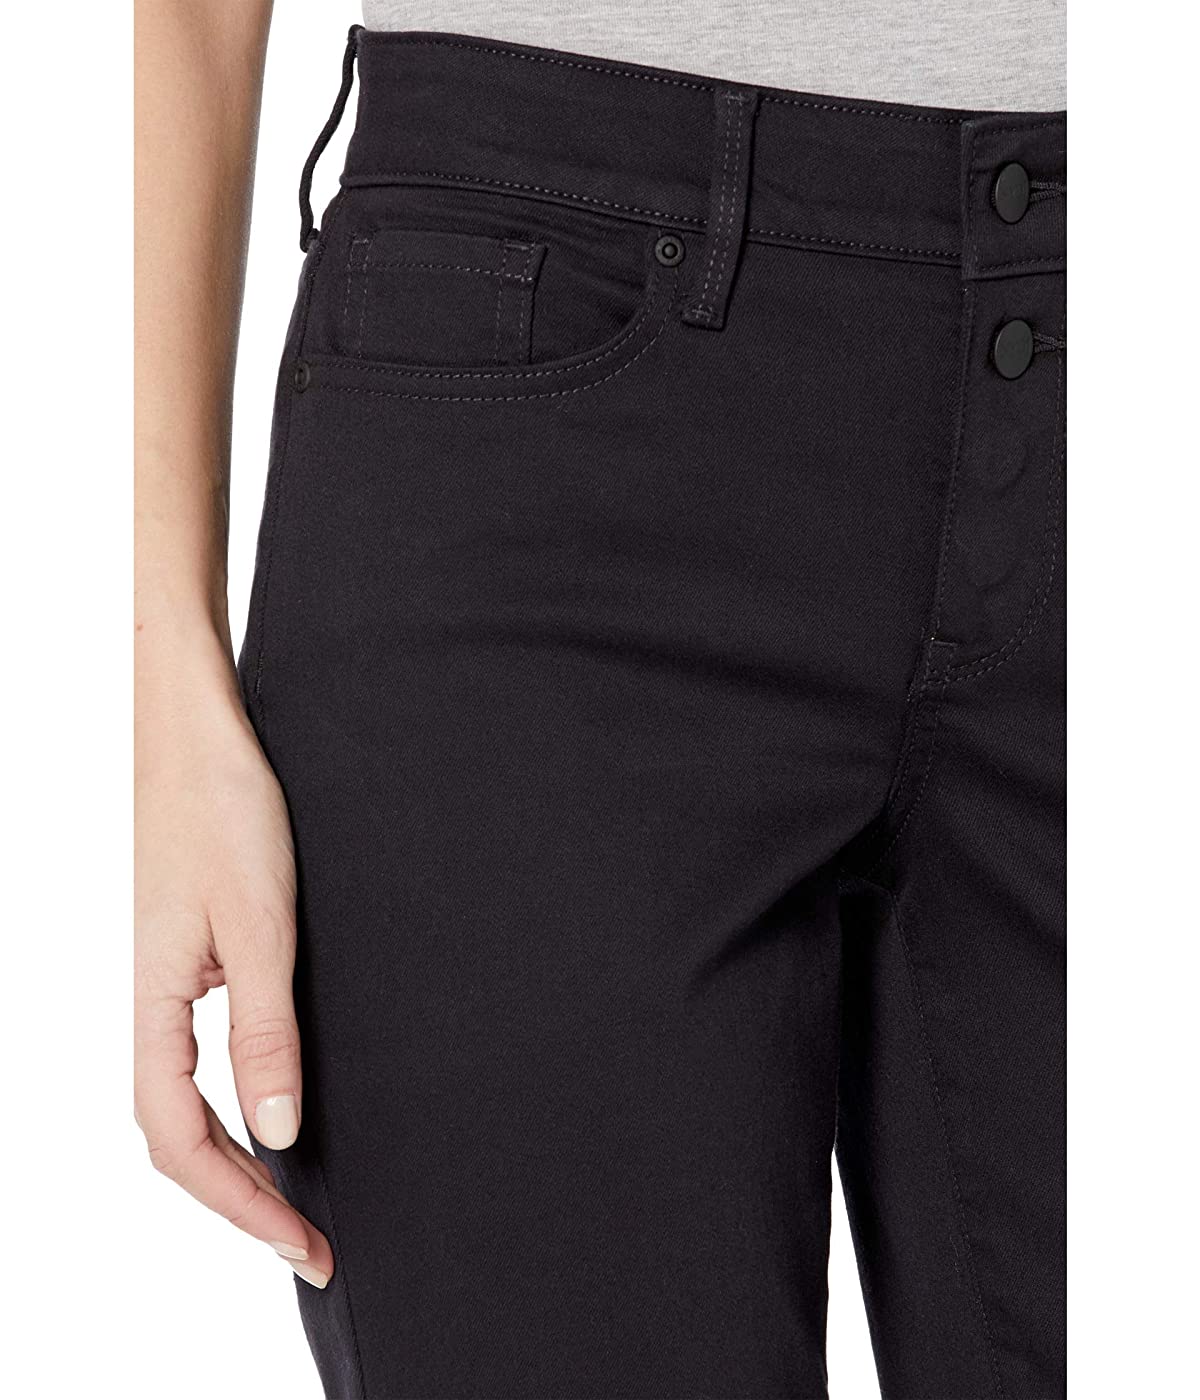 NYDJ Womens Black Zippered Pocketed Capri Jeans Size: 2 - image 2 of 3